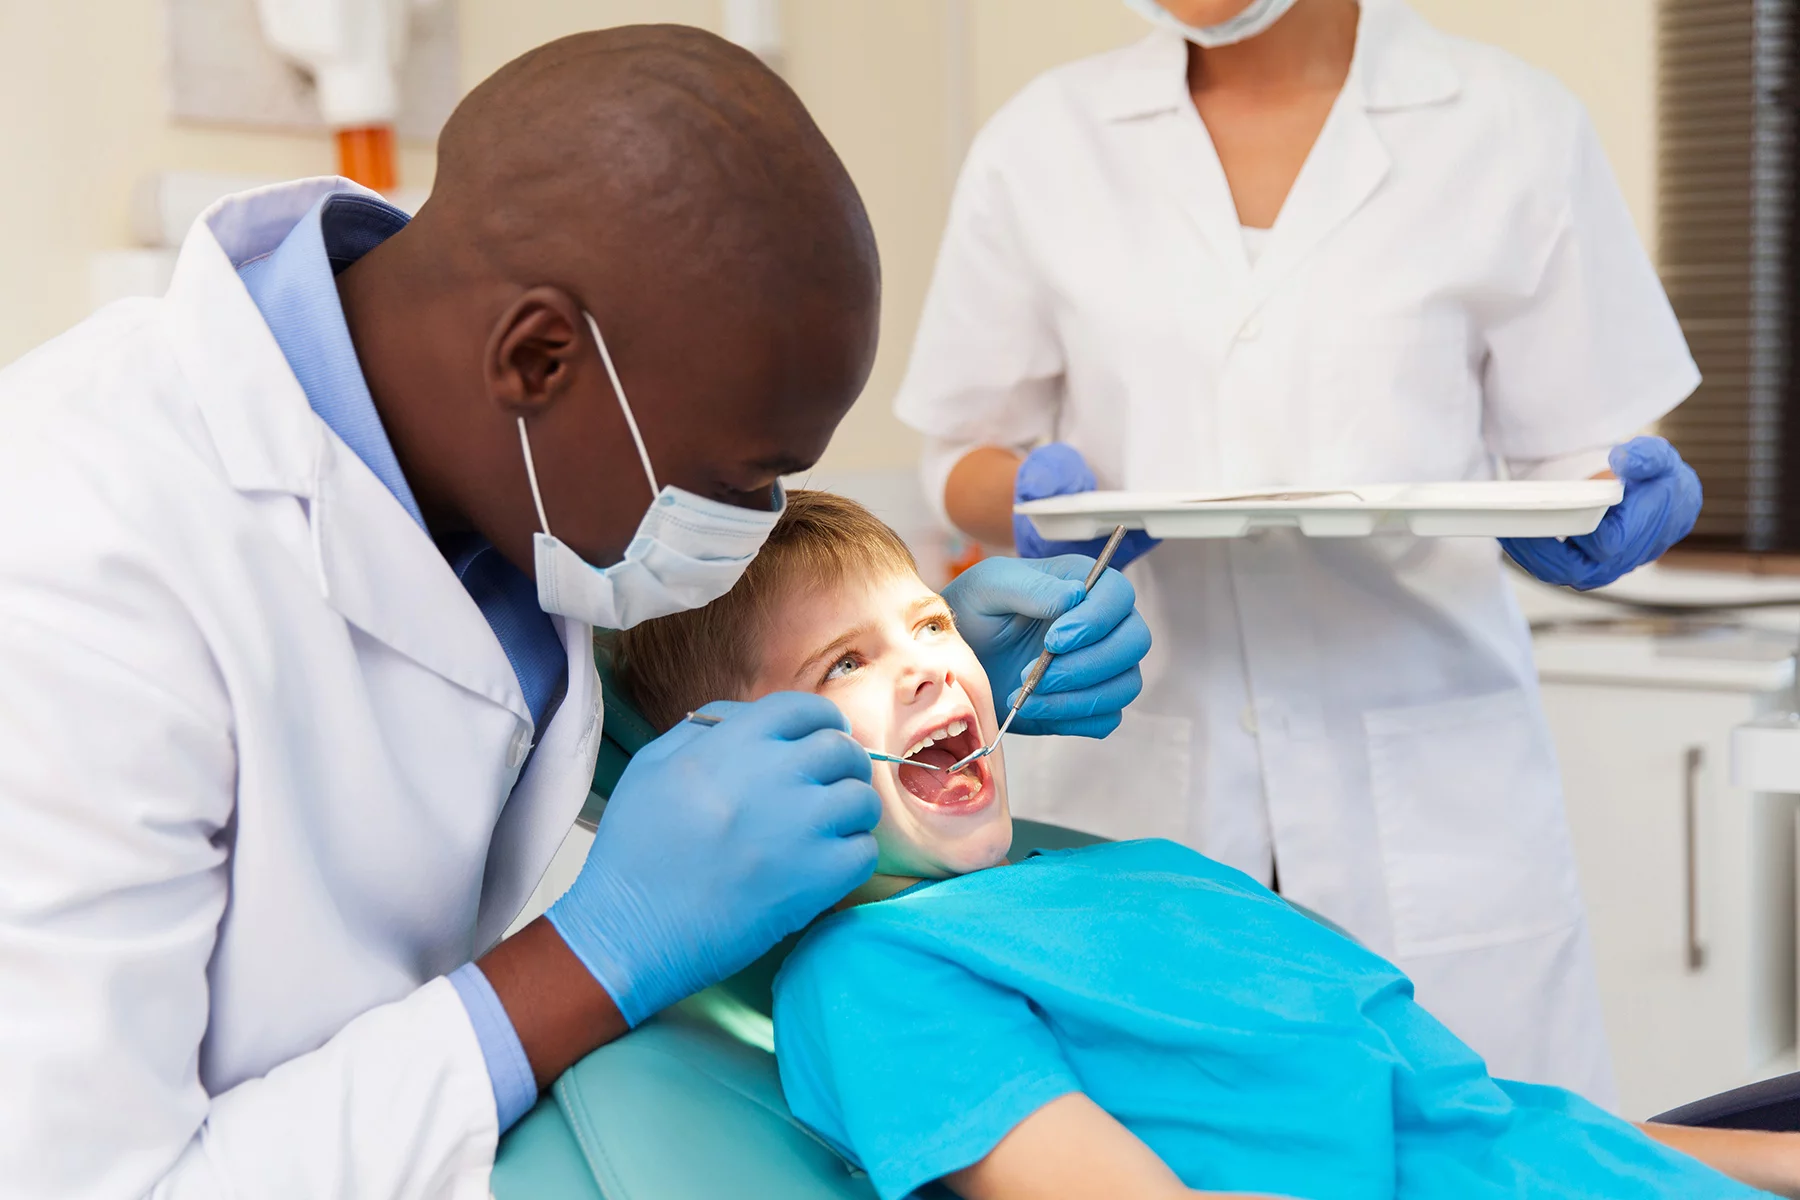 Dentist checking a child's teeth in chair